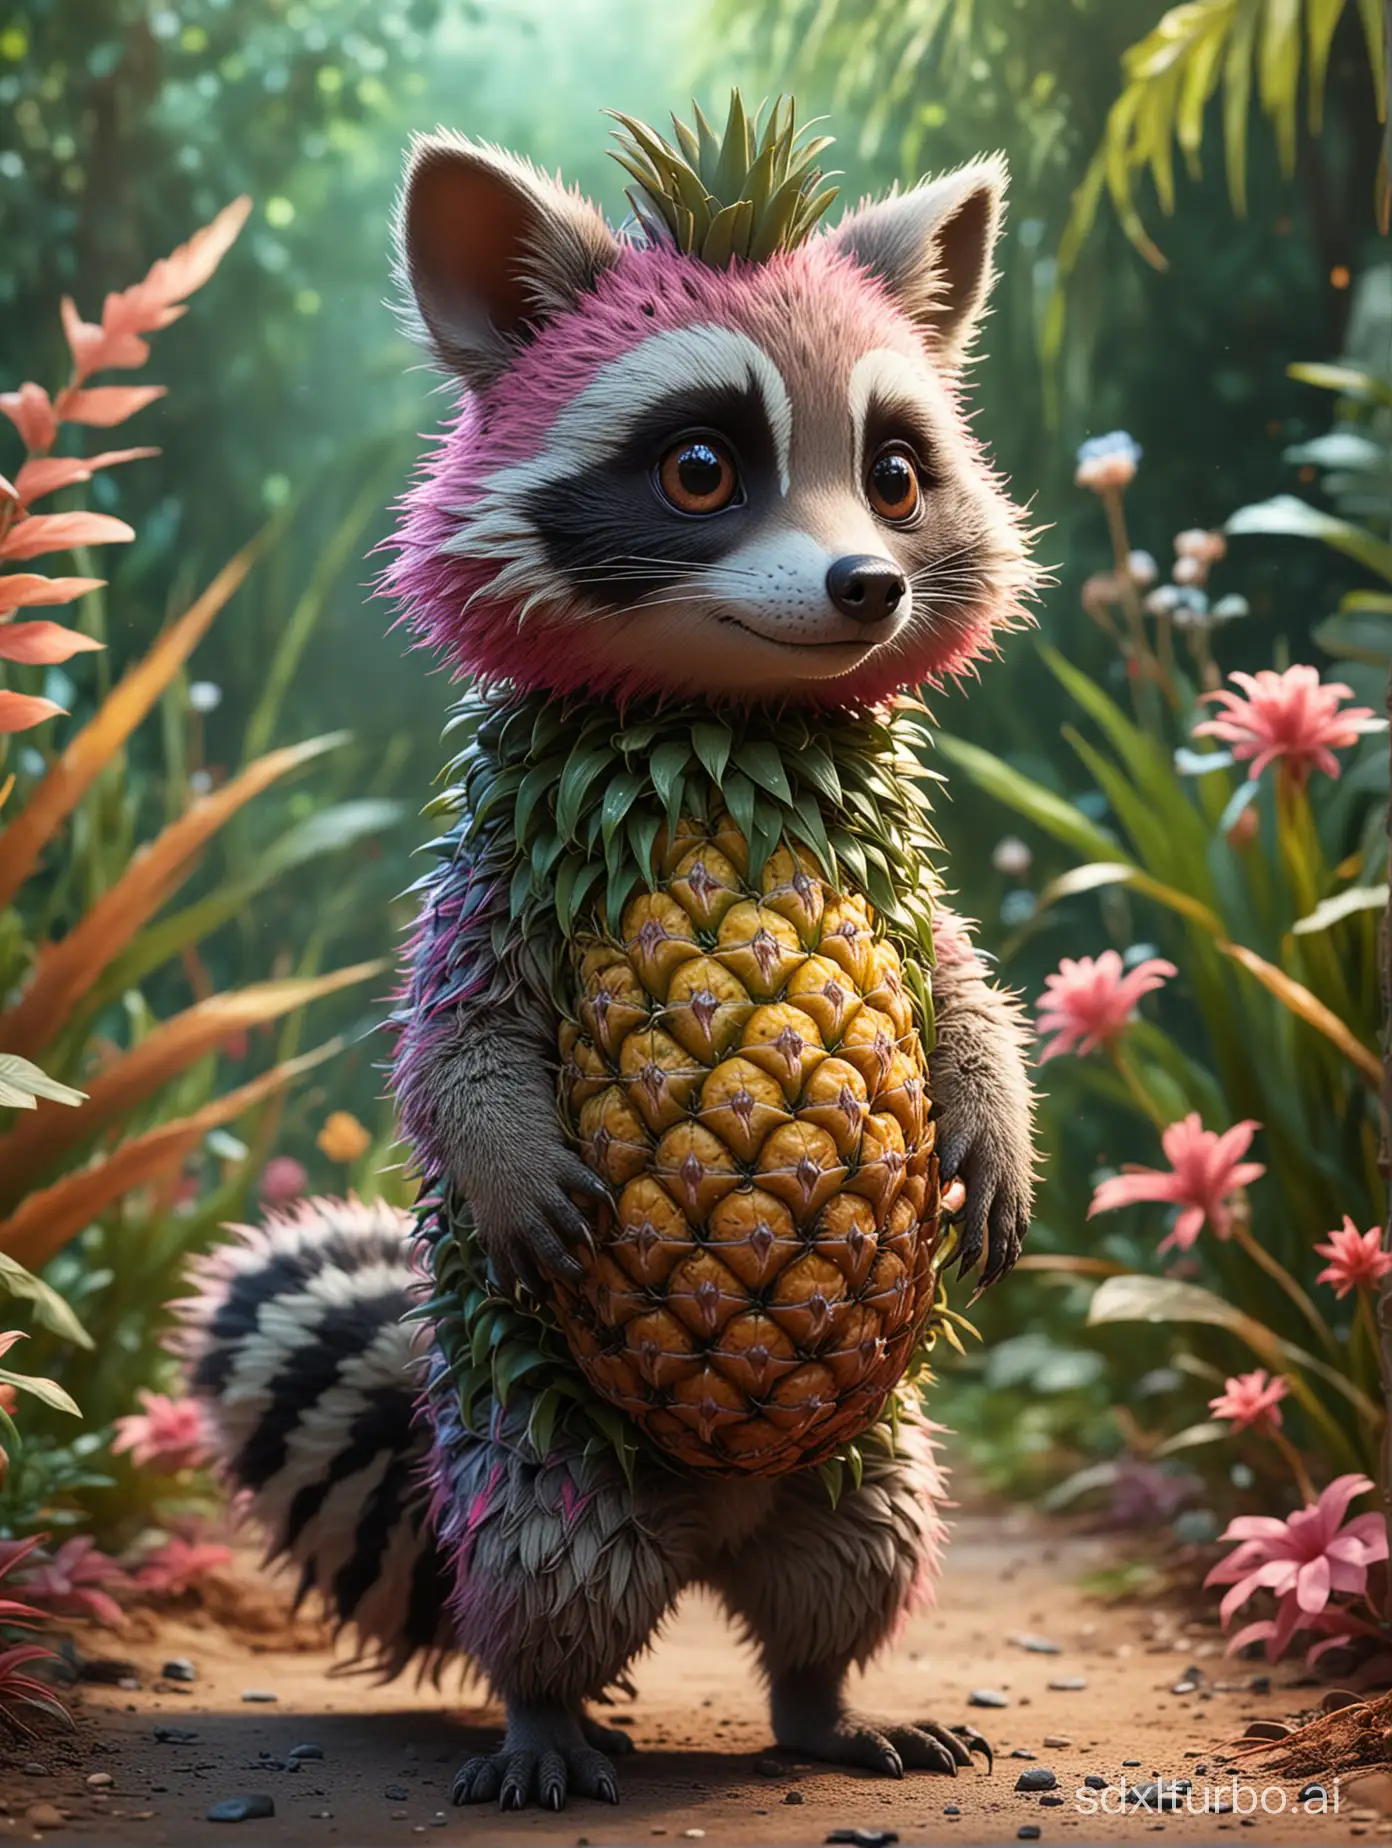 Surreal-Pineapple-Raccoon-Fantastical-Creature-in-PixarStyle-Animation